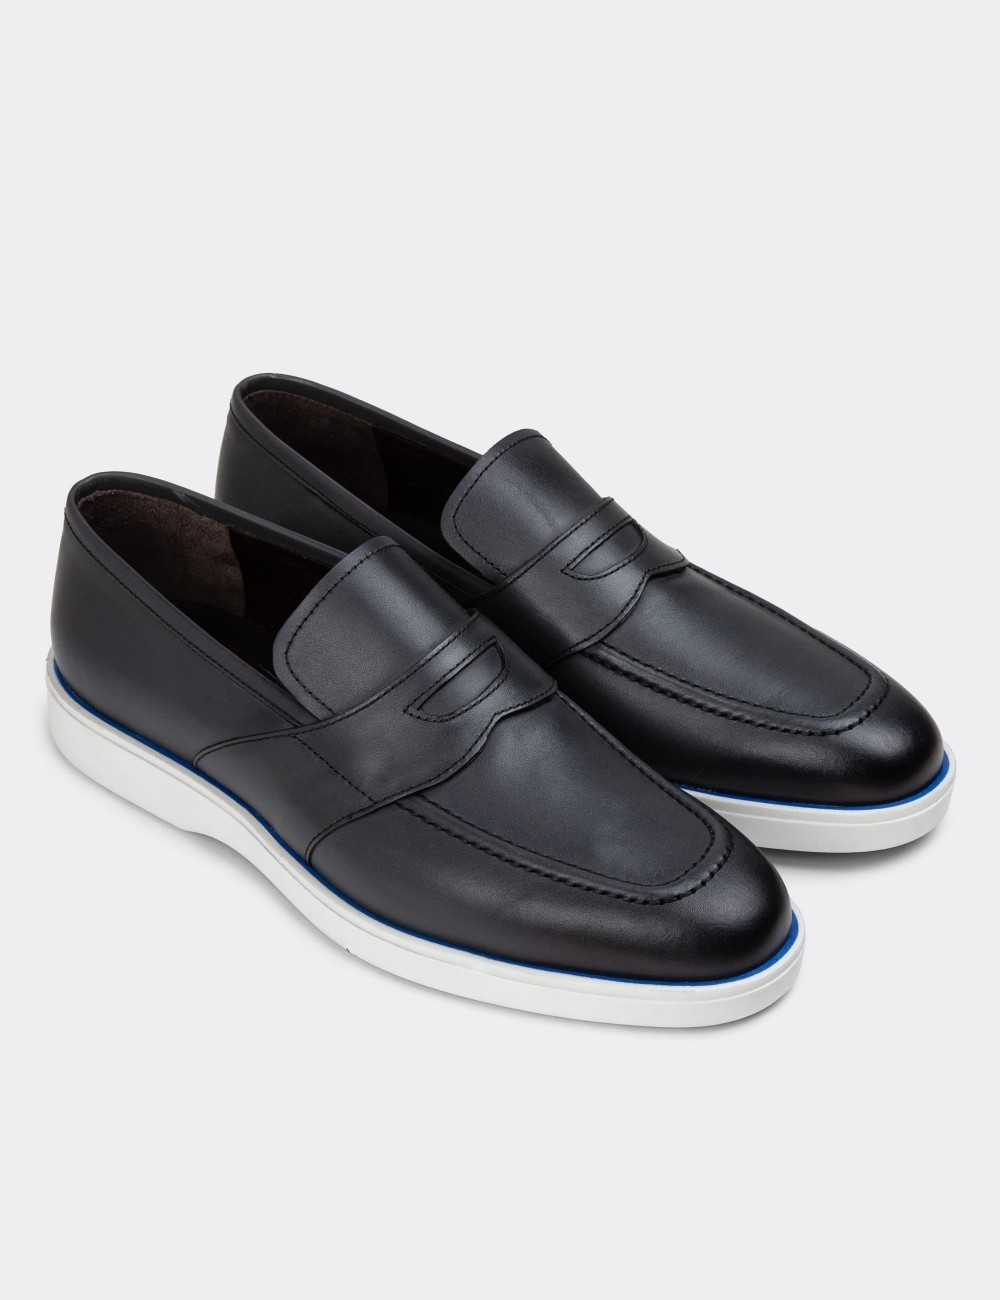 Gray Leather Loafers - 01960MGRIC01